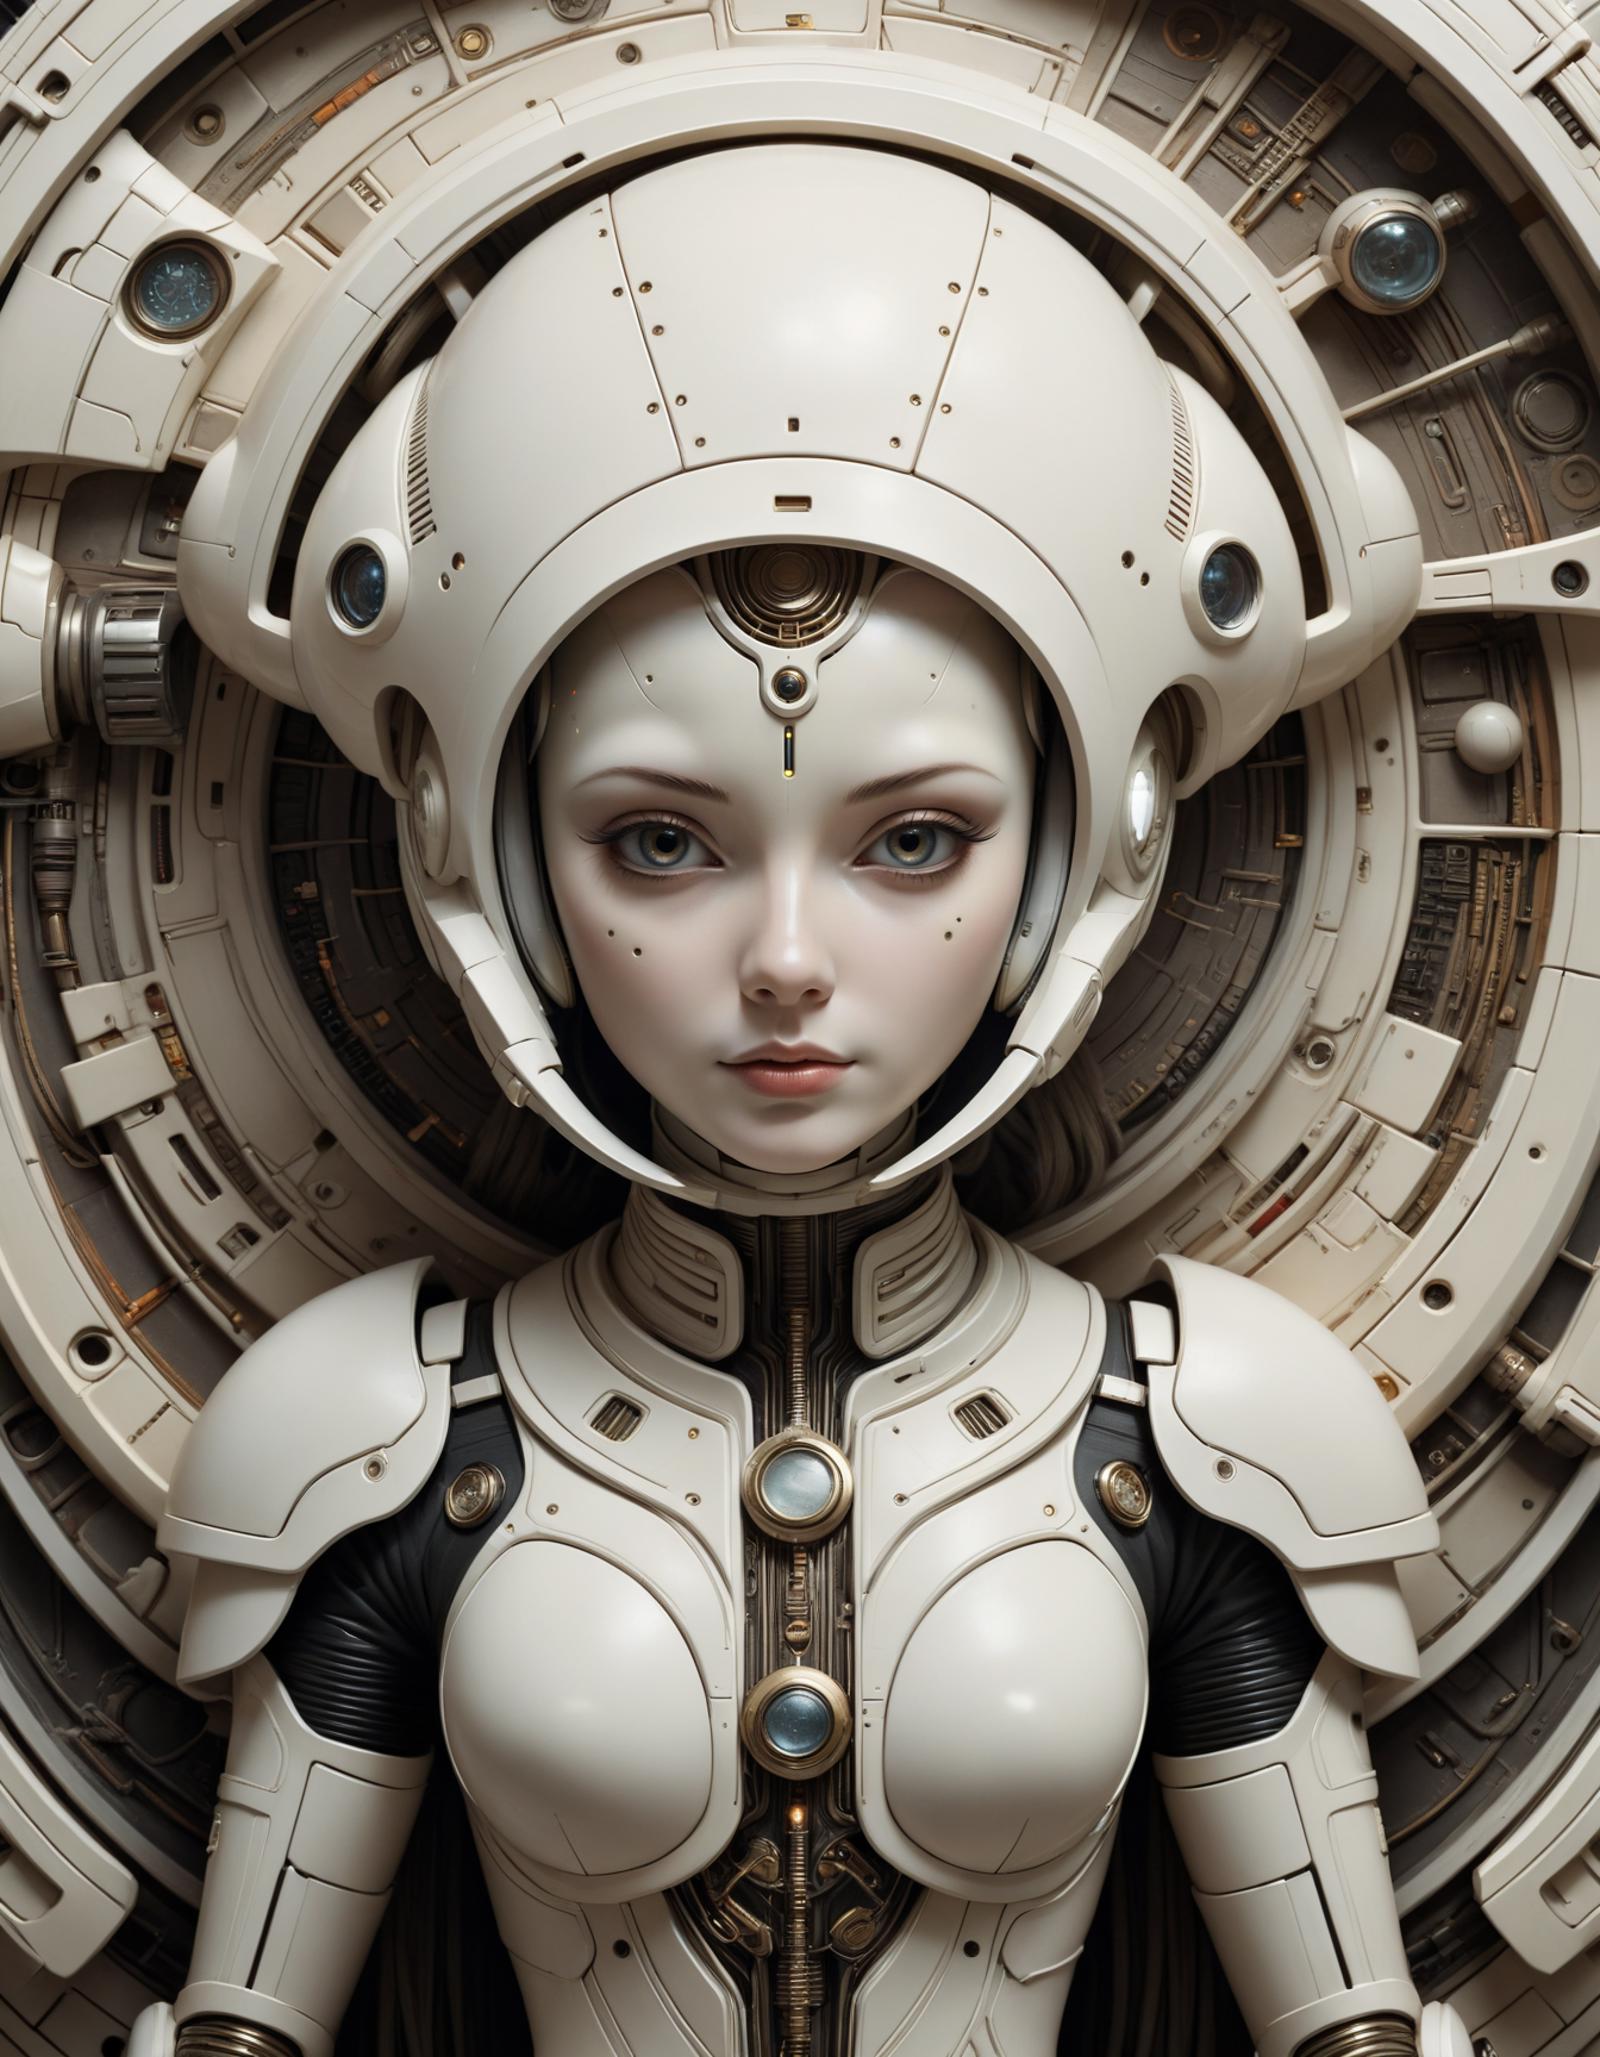 White Sculpture of a Woman in a Spacesuit with Glowing Eyes